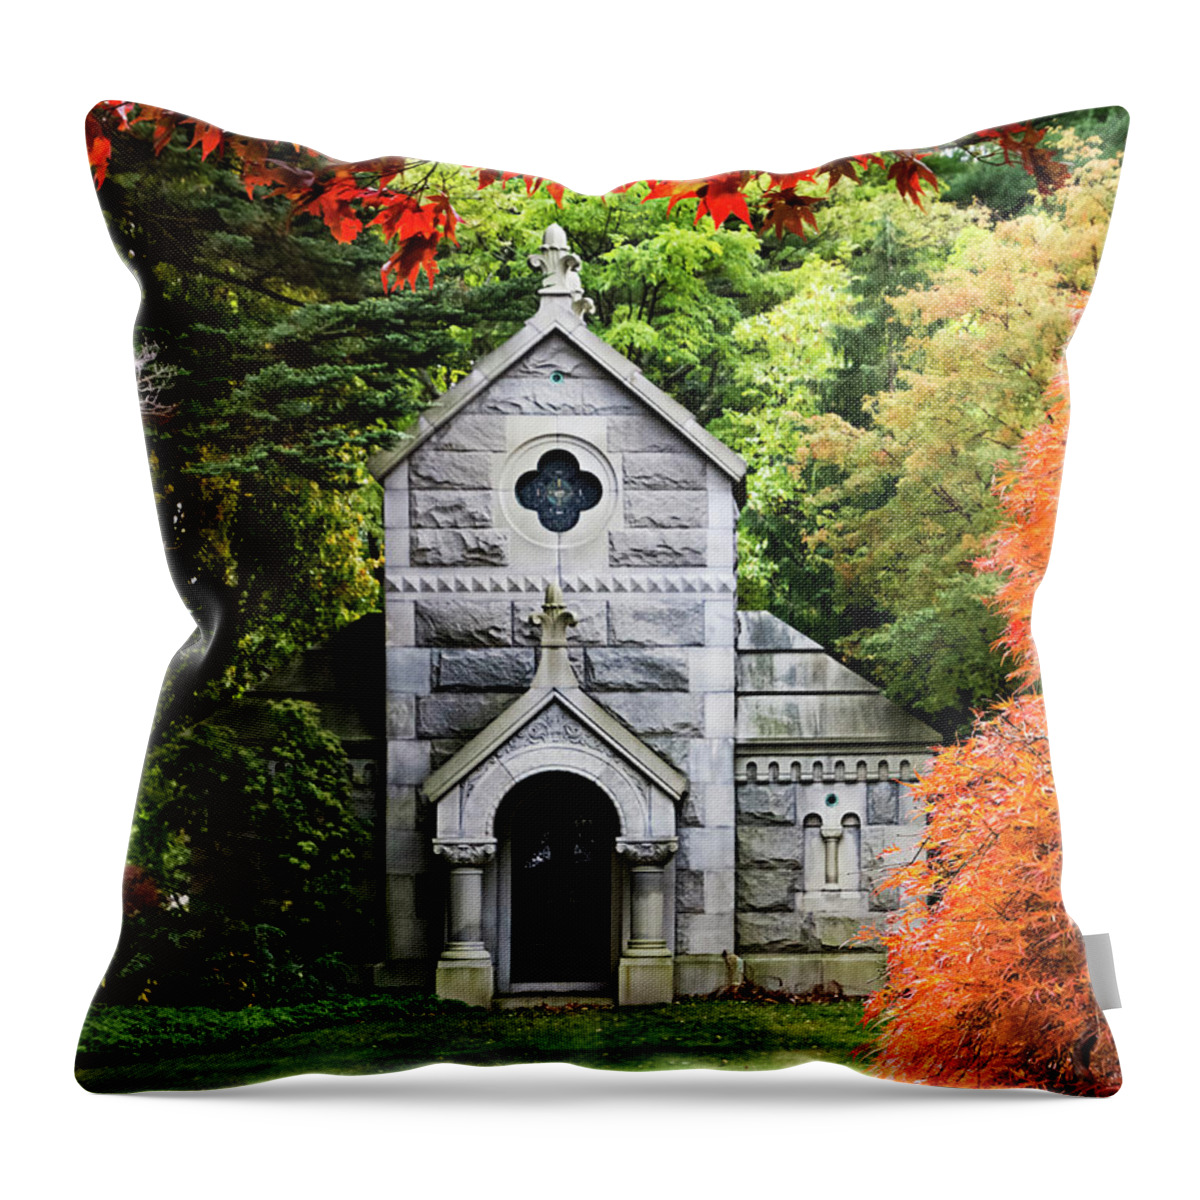 Autumn Throw Pillow featuring the photograph Autumn Chapel by Betty Denise